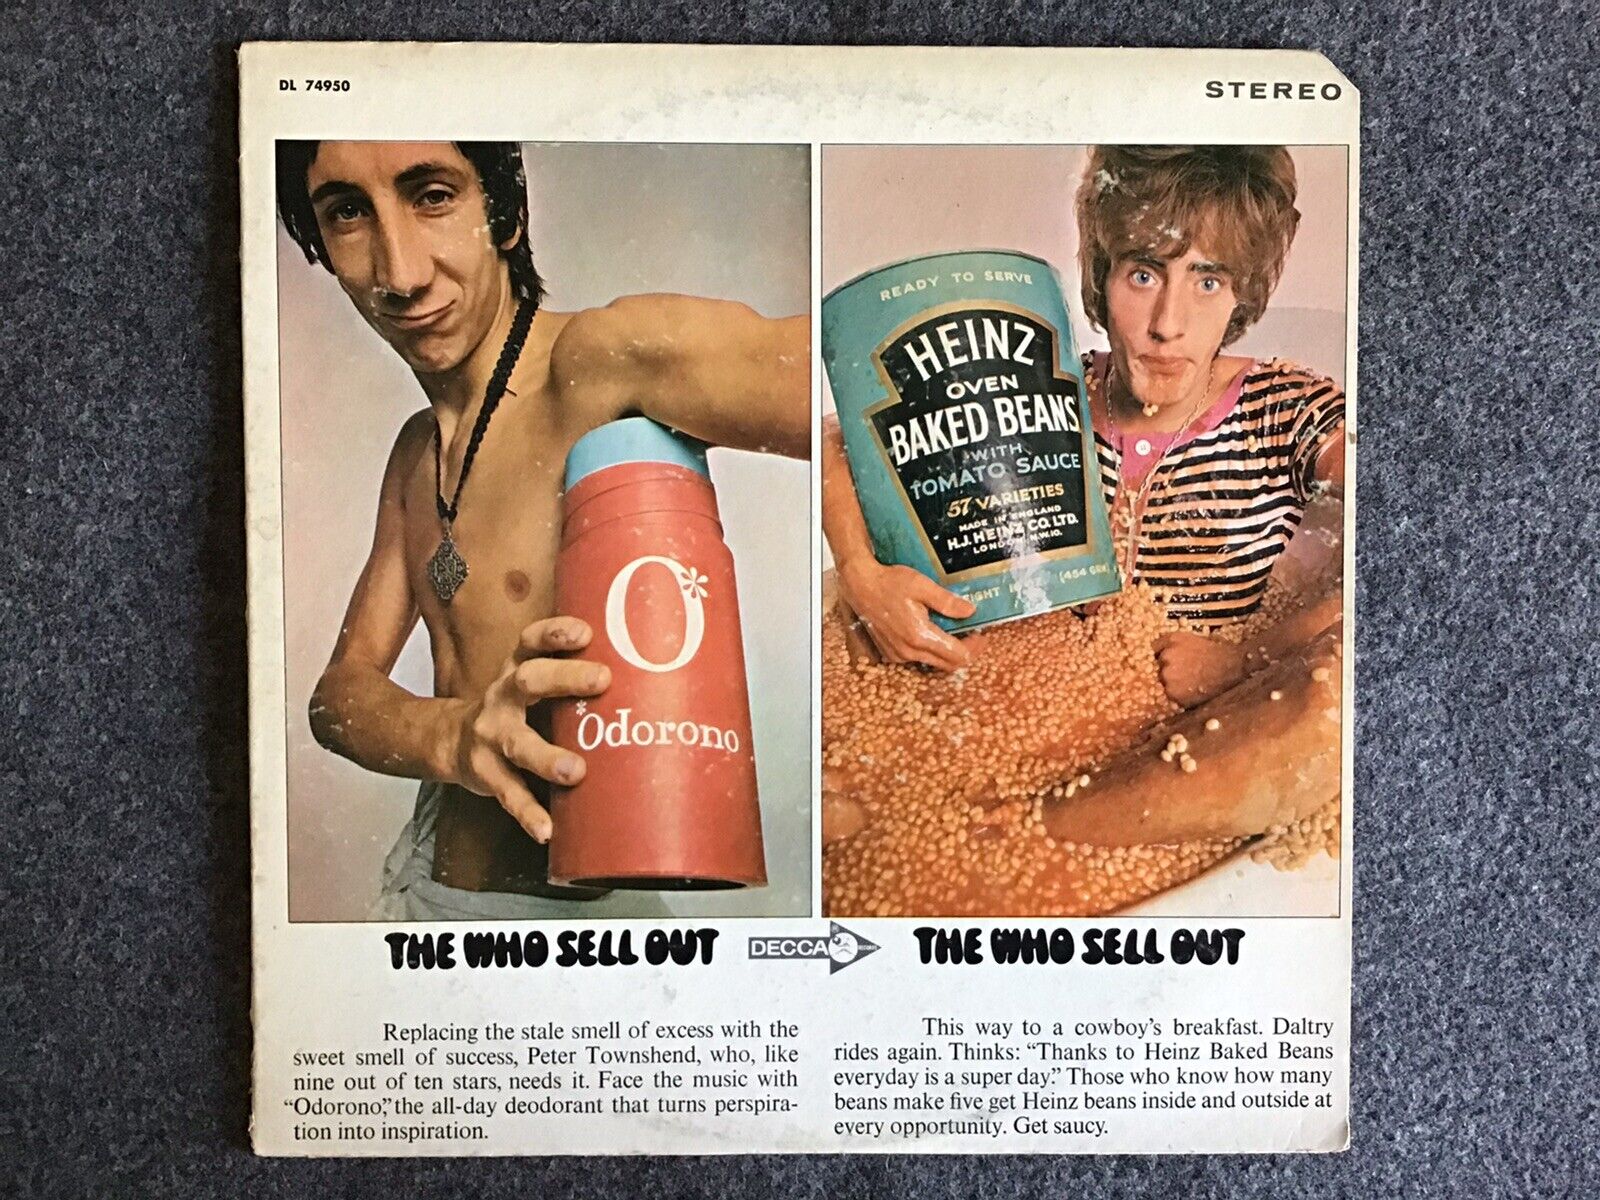 THE WHO LP The Who Sell Out Reissue 1971 Decca DL 74950 VG+/VG